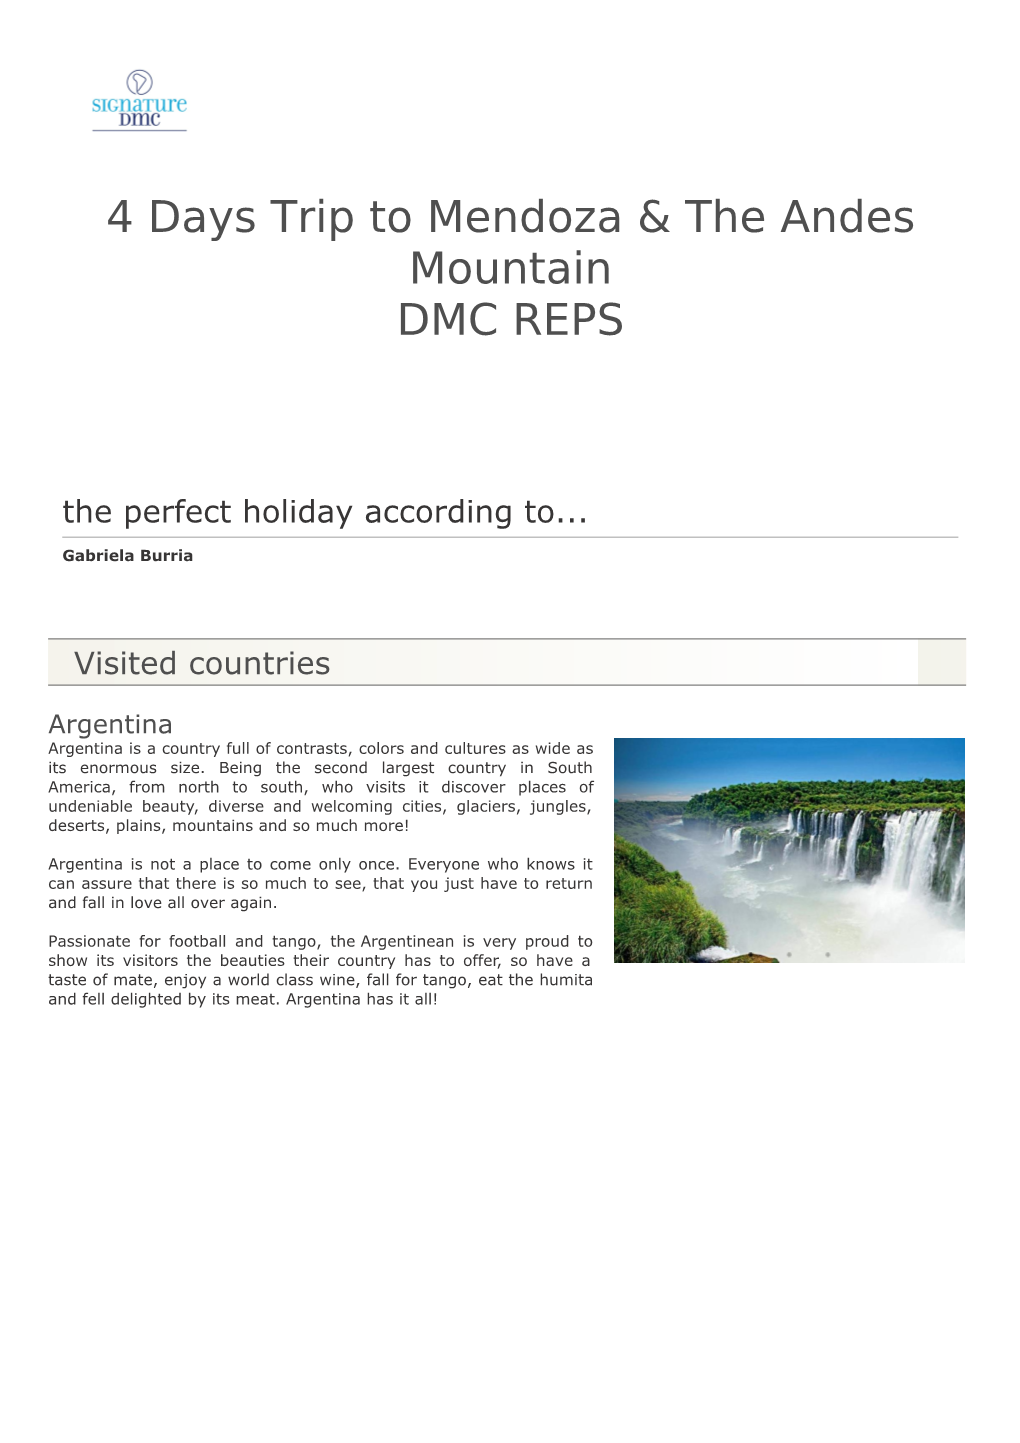 Trip to Mendoza & the Andes 4D